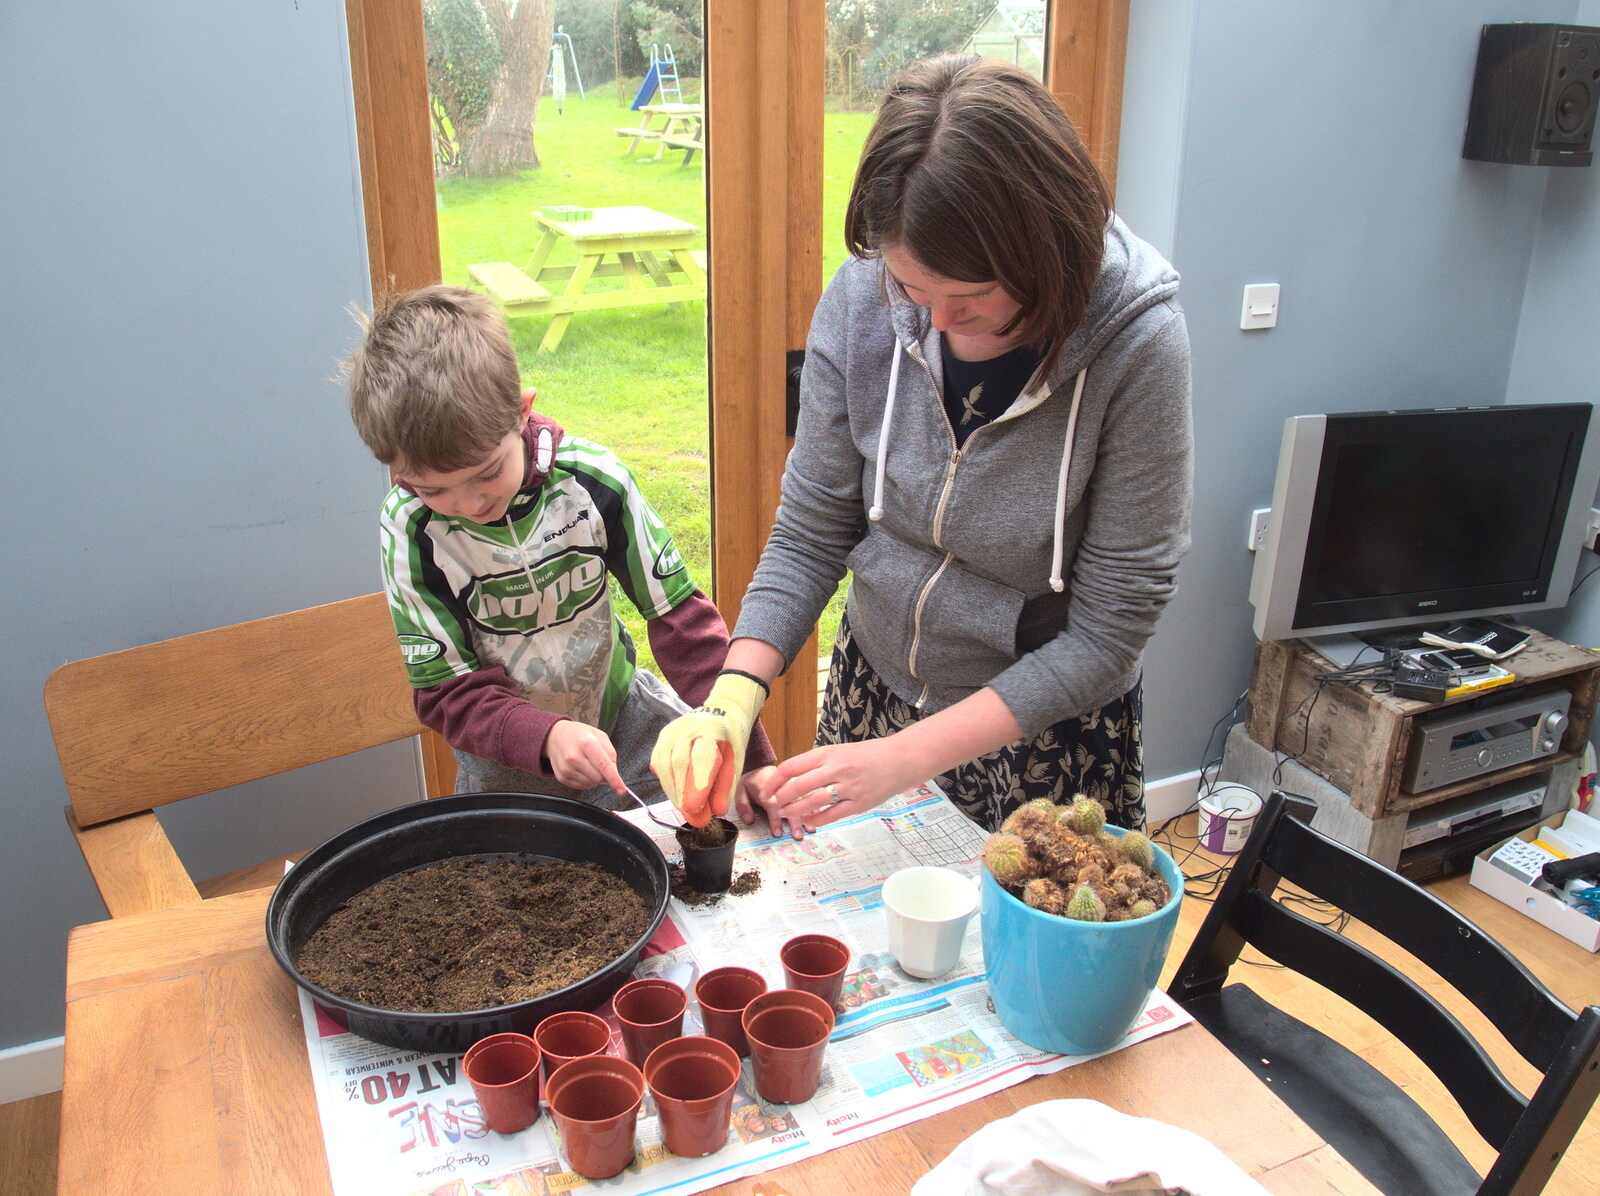 February Cactus Randomness, London and Brome, Suffolk - 14th February 2016: Fred and Isobel pot up some cacti